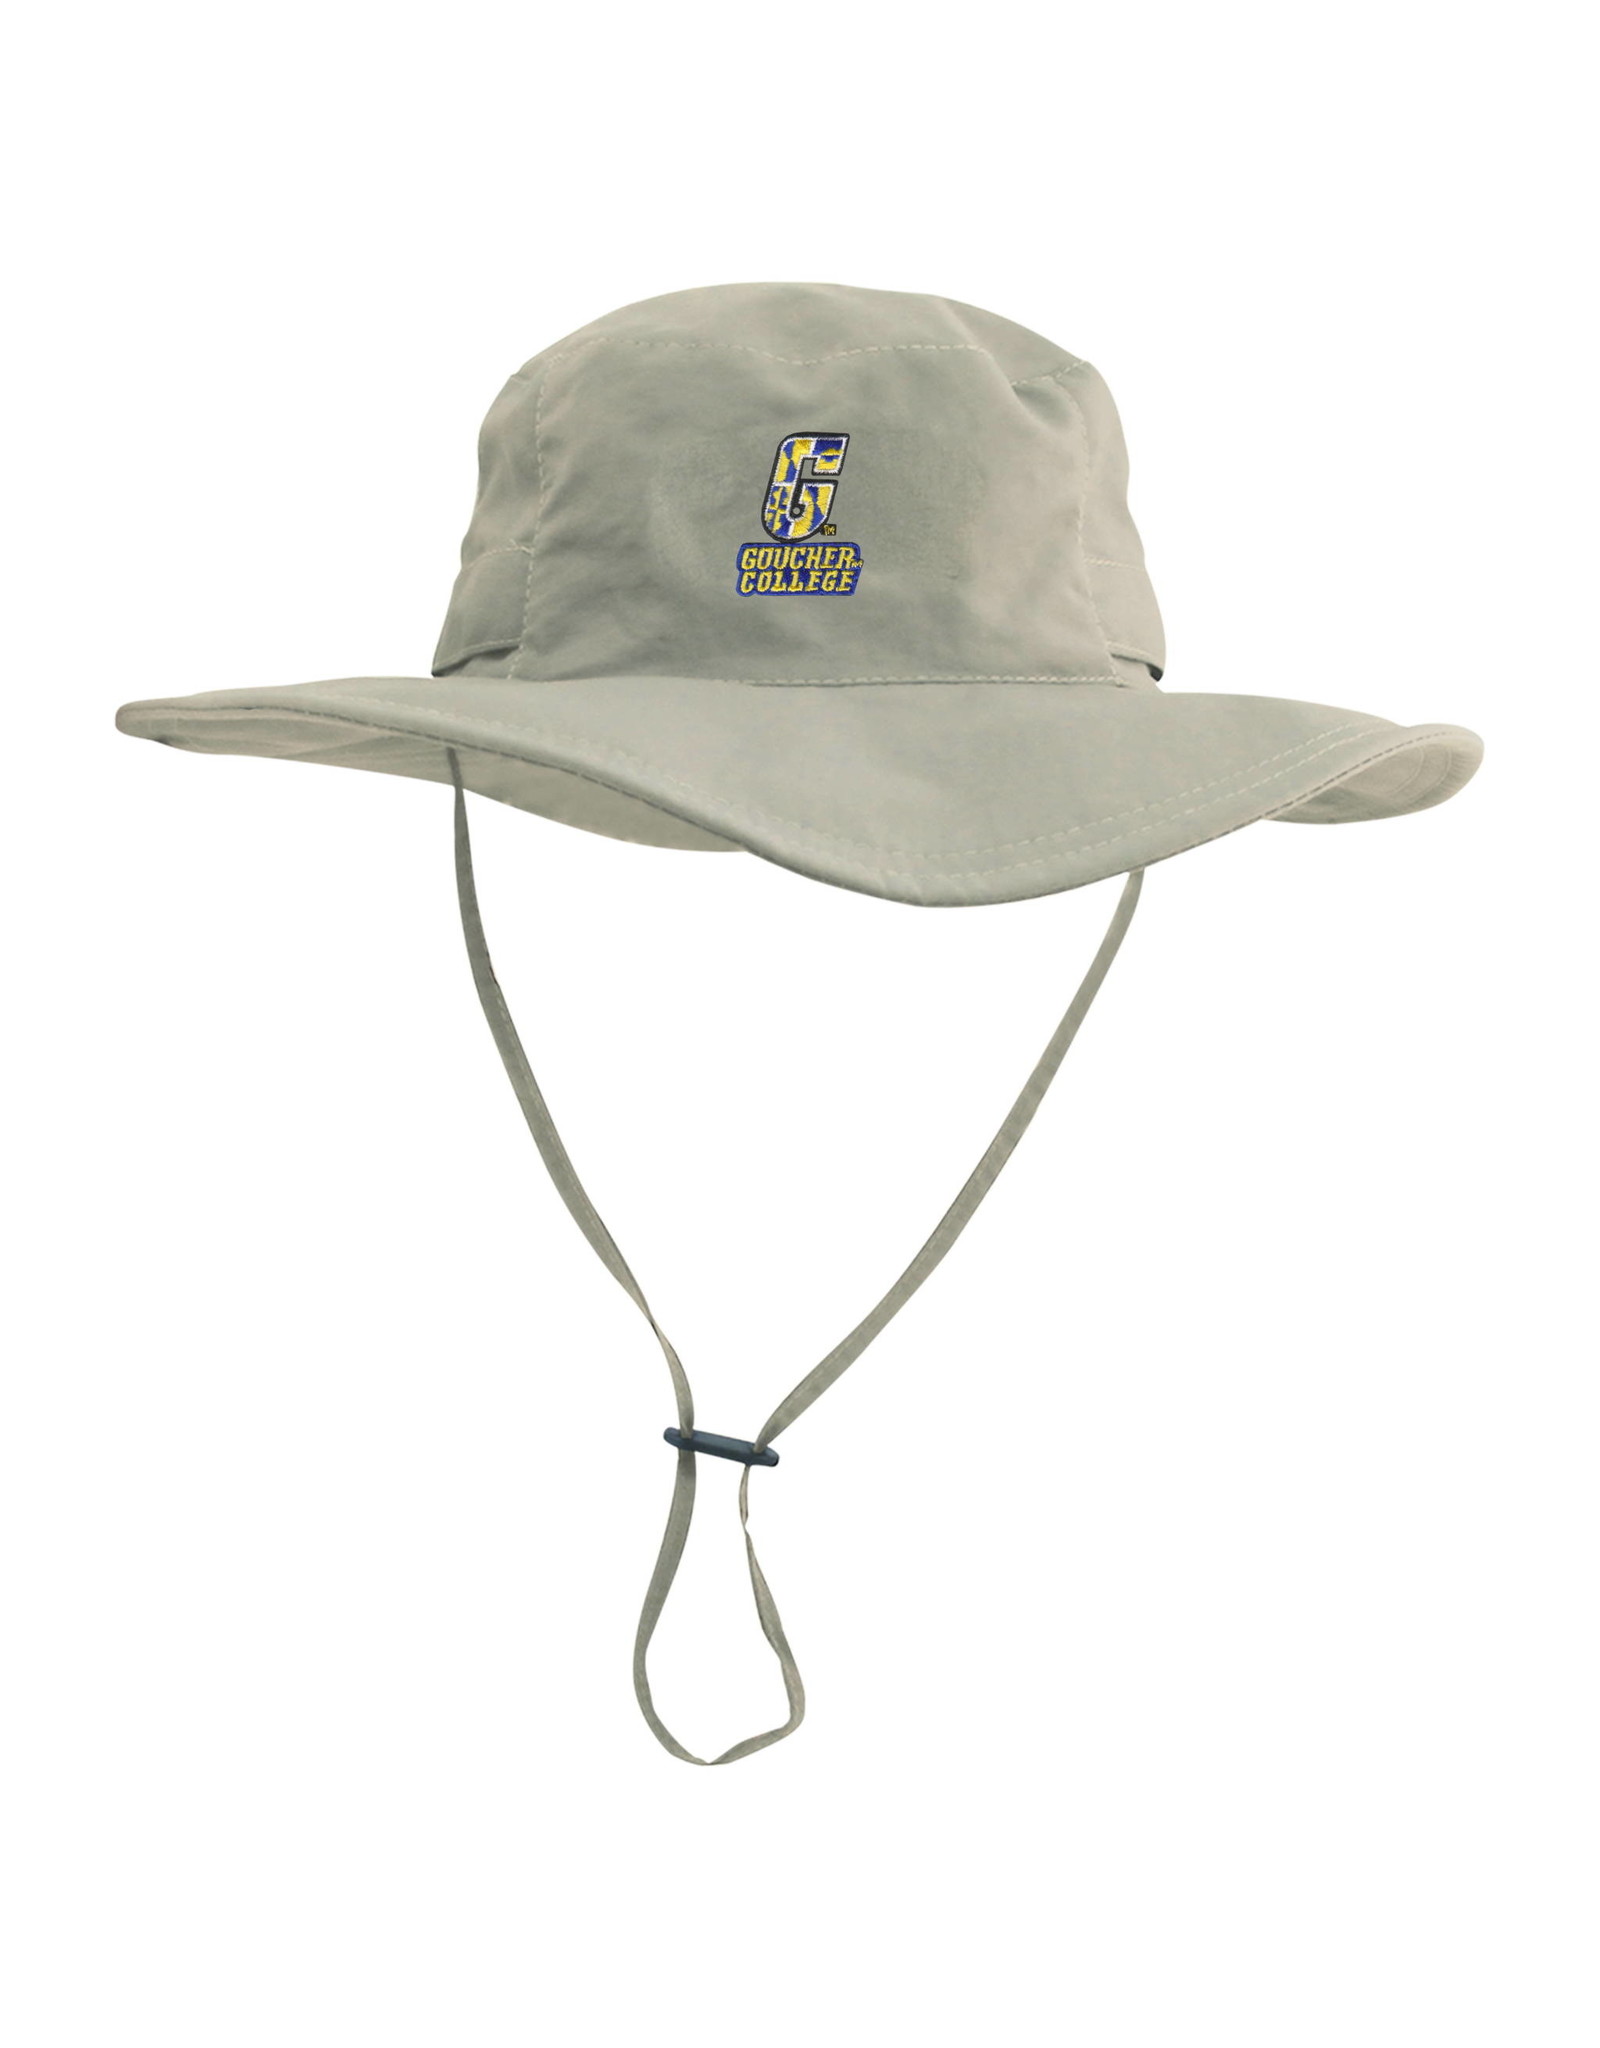 LOGOFIT Boonie "Goucher College" Outback Hat